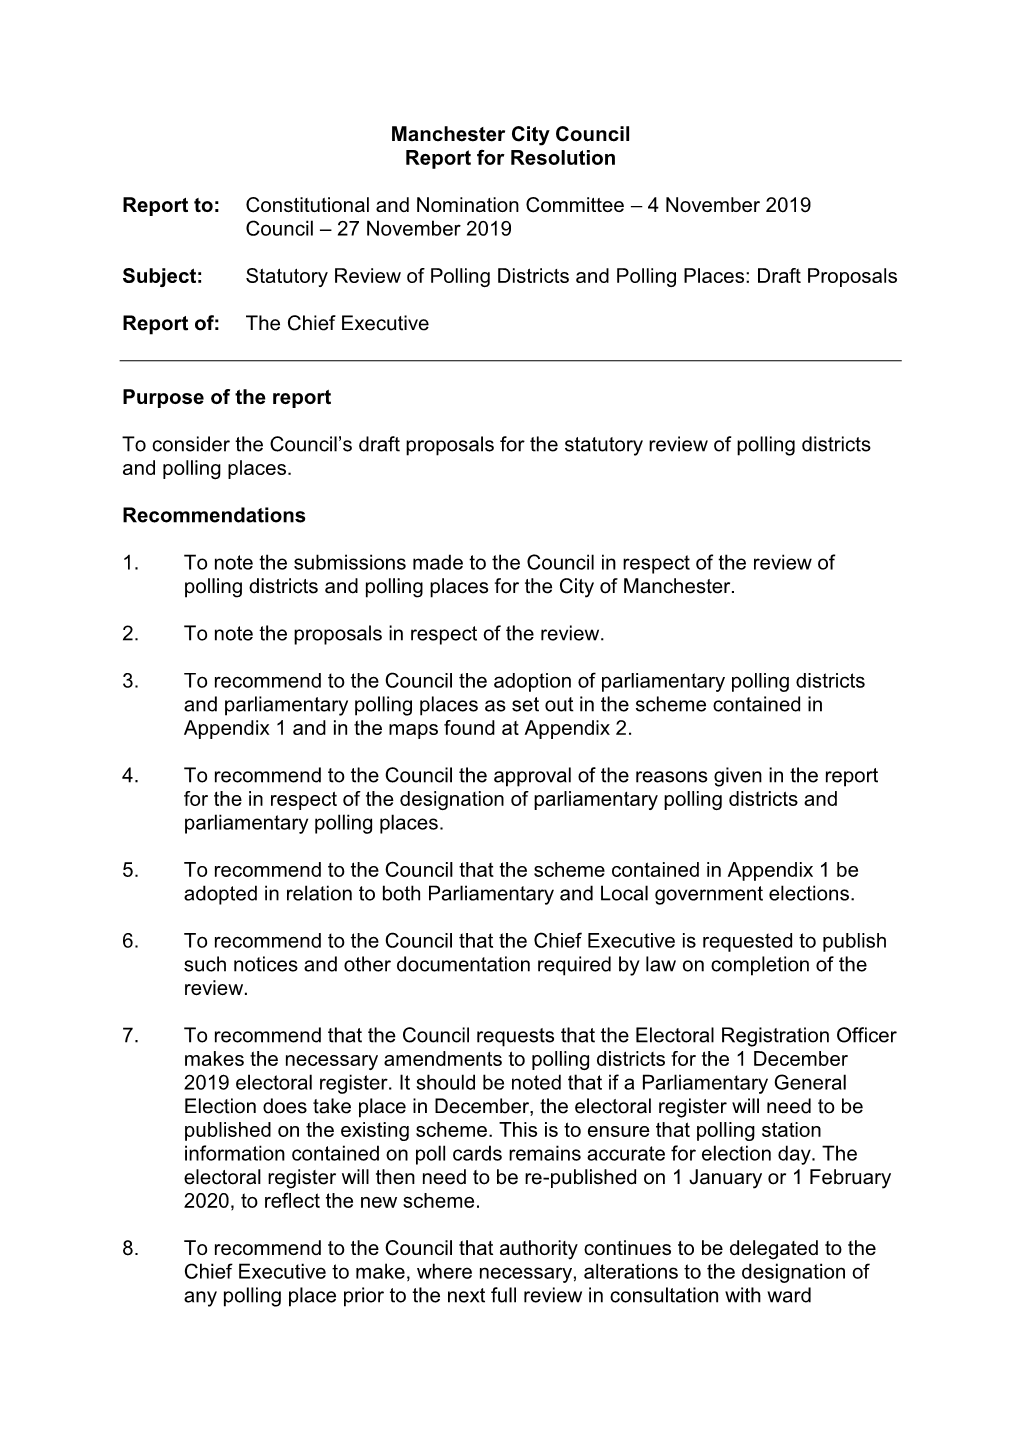 Statutory Review of Polling Districts and Polling Places: Draft Proposals